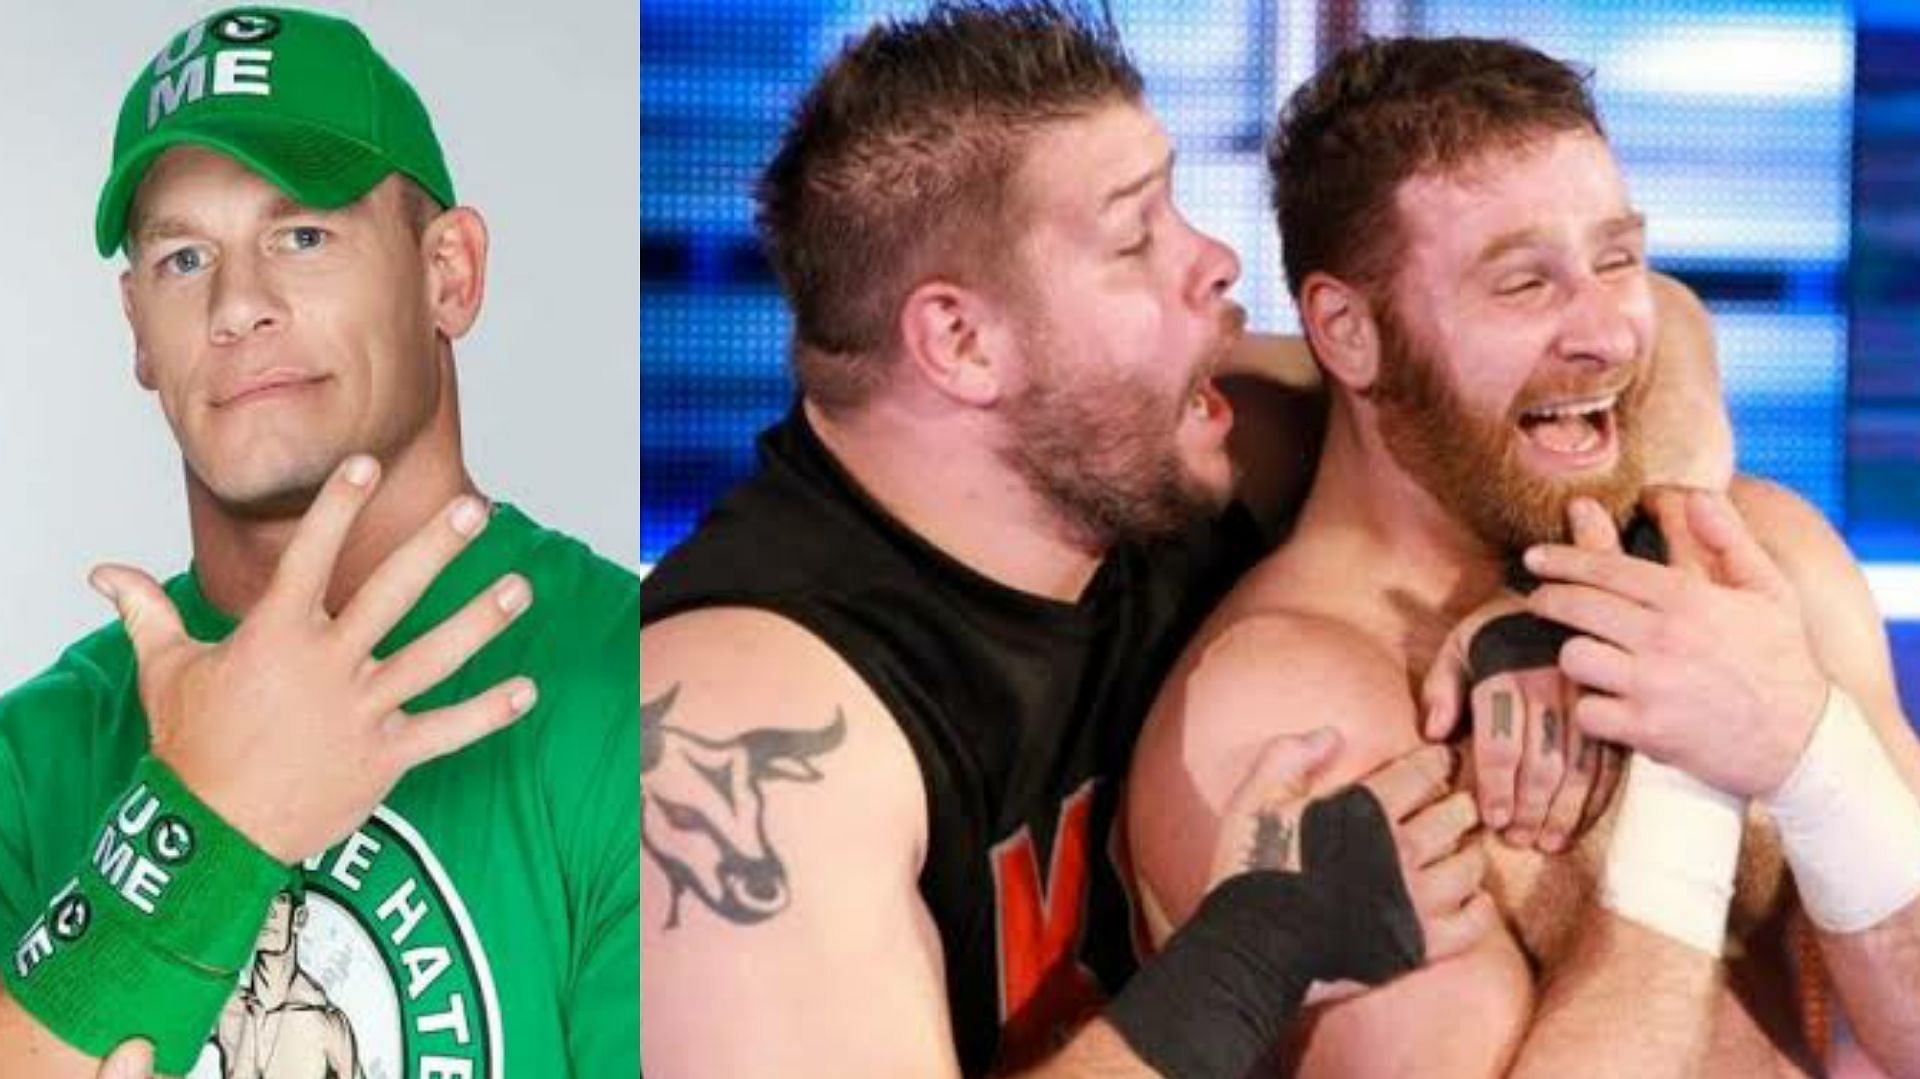 Will Sami Zayn turn on Roman Reigns to side with Kevin Owens and John Cena?